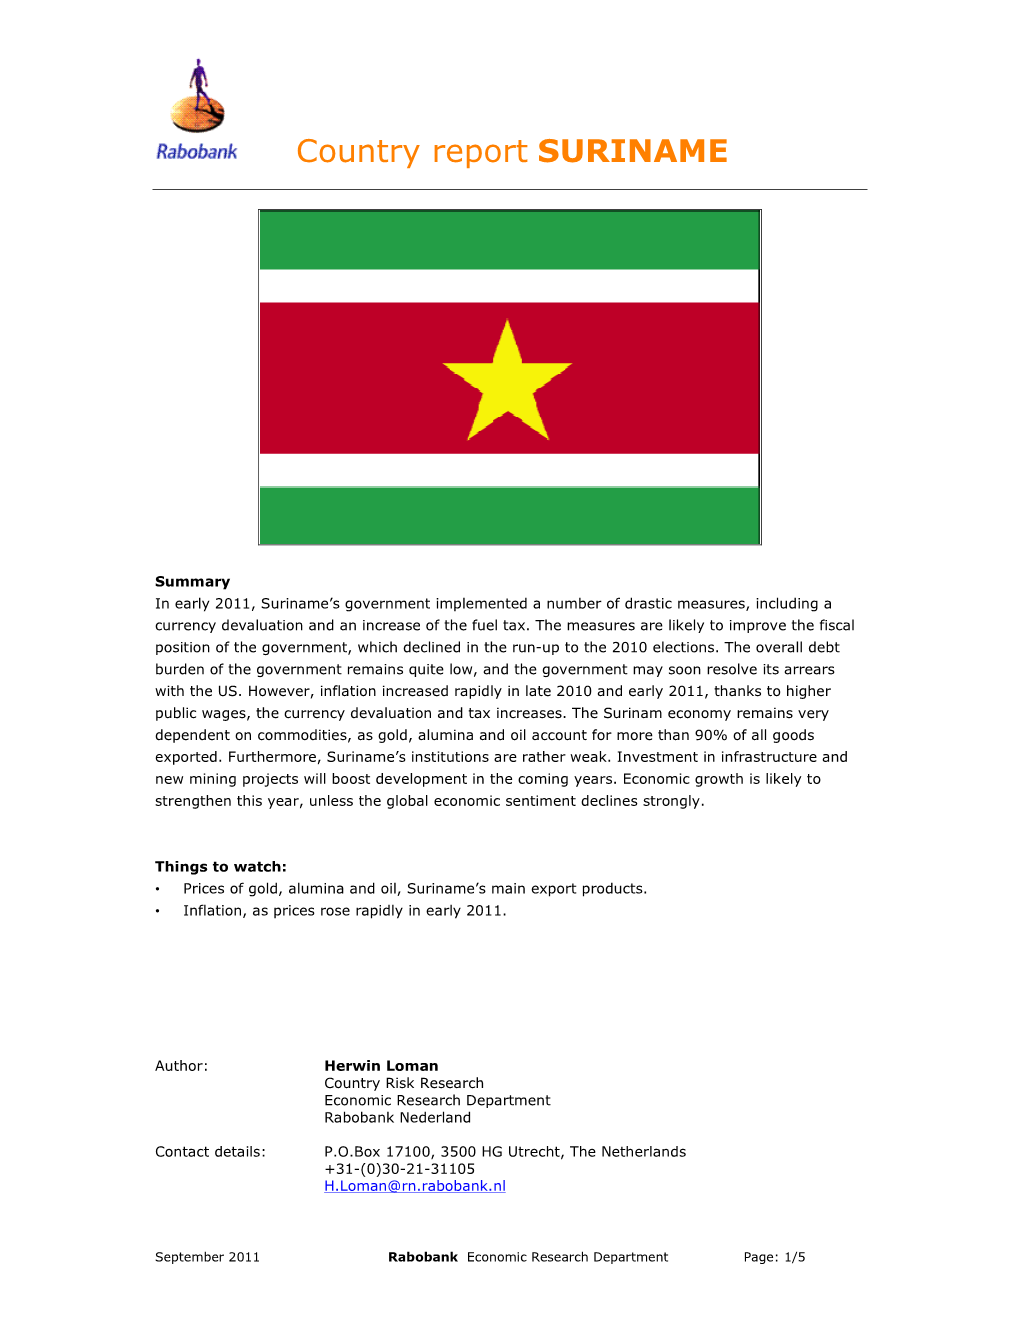 Suriname (Country Report)